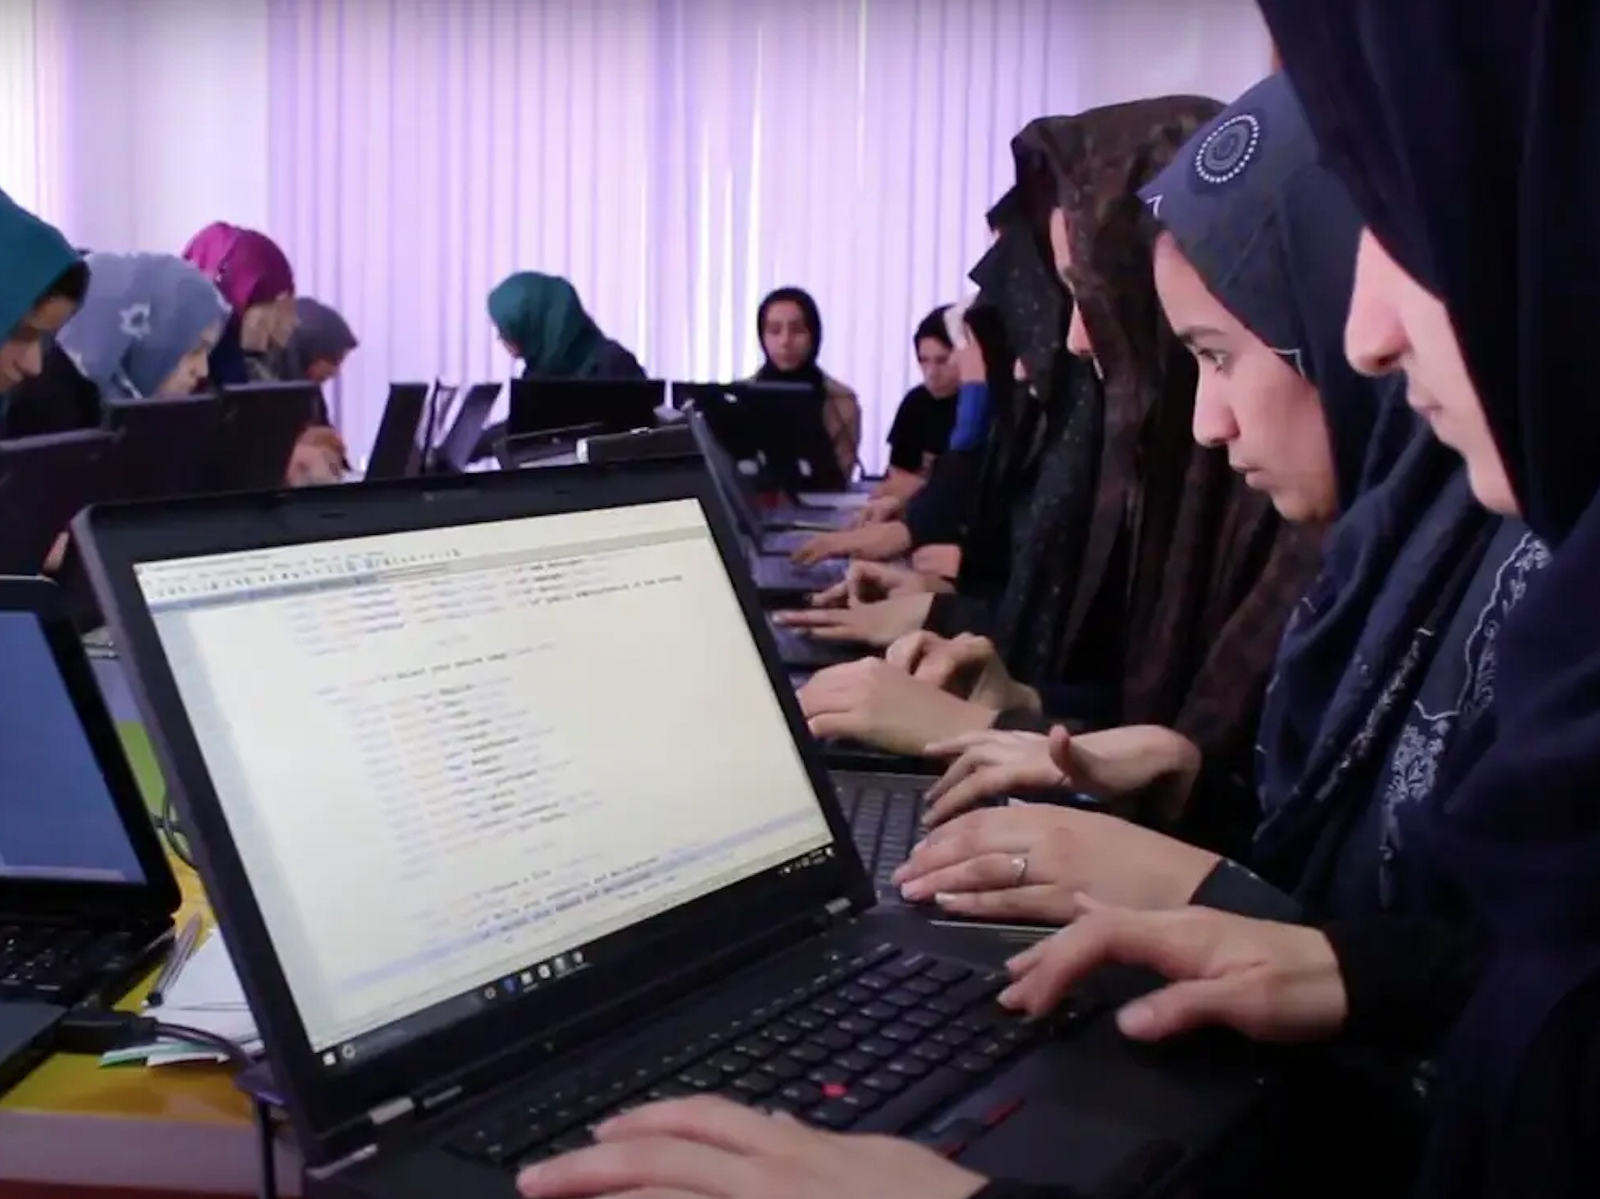 Girls learn to code at the Code to Inspire school in Herat, Afghanistan. Fereshteh Forough